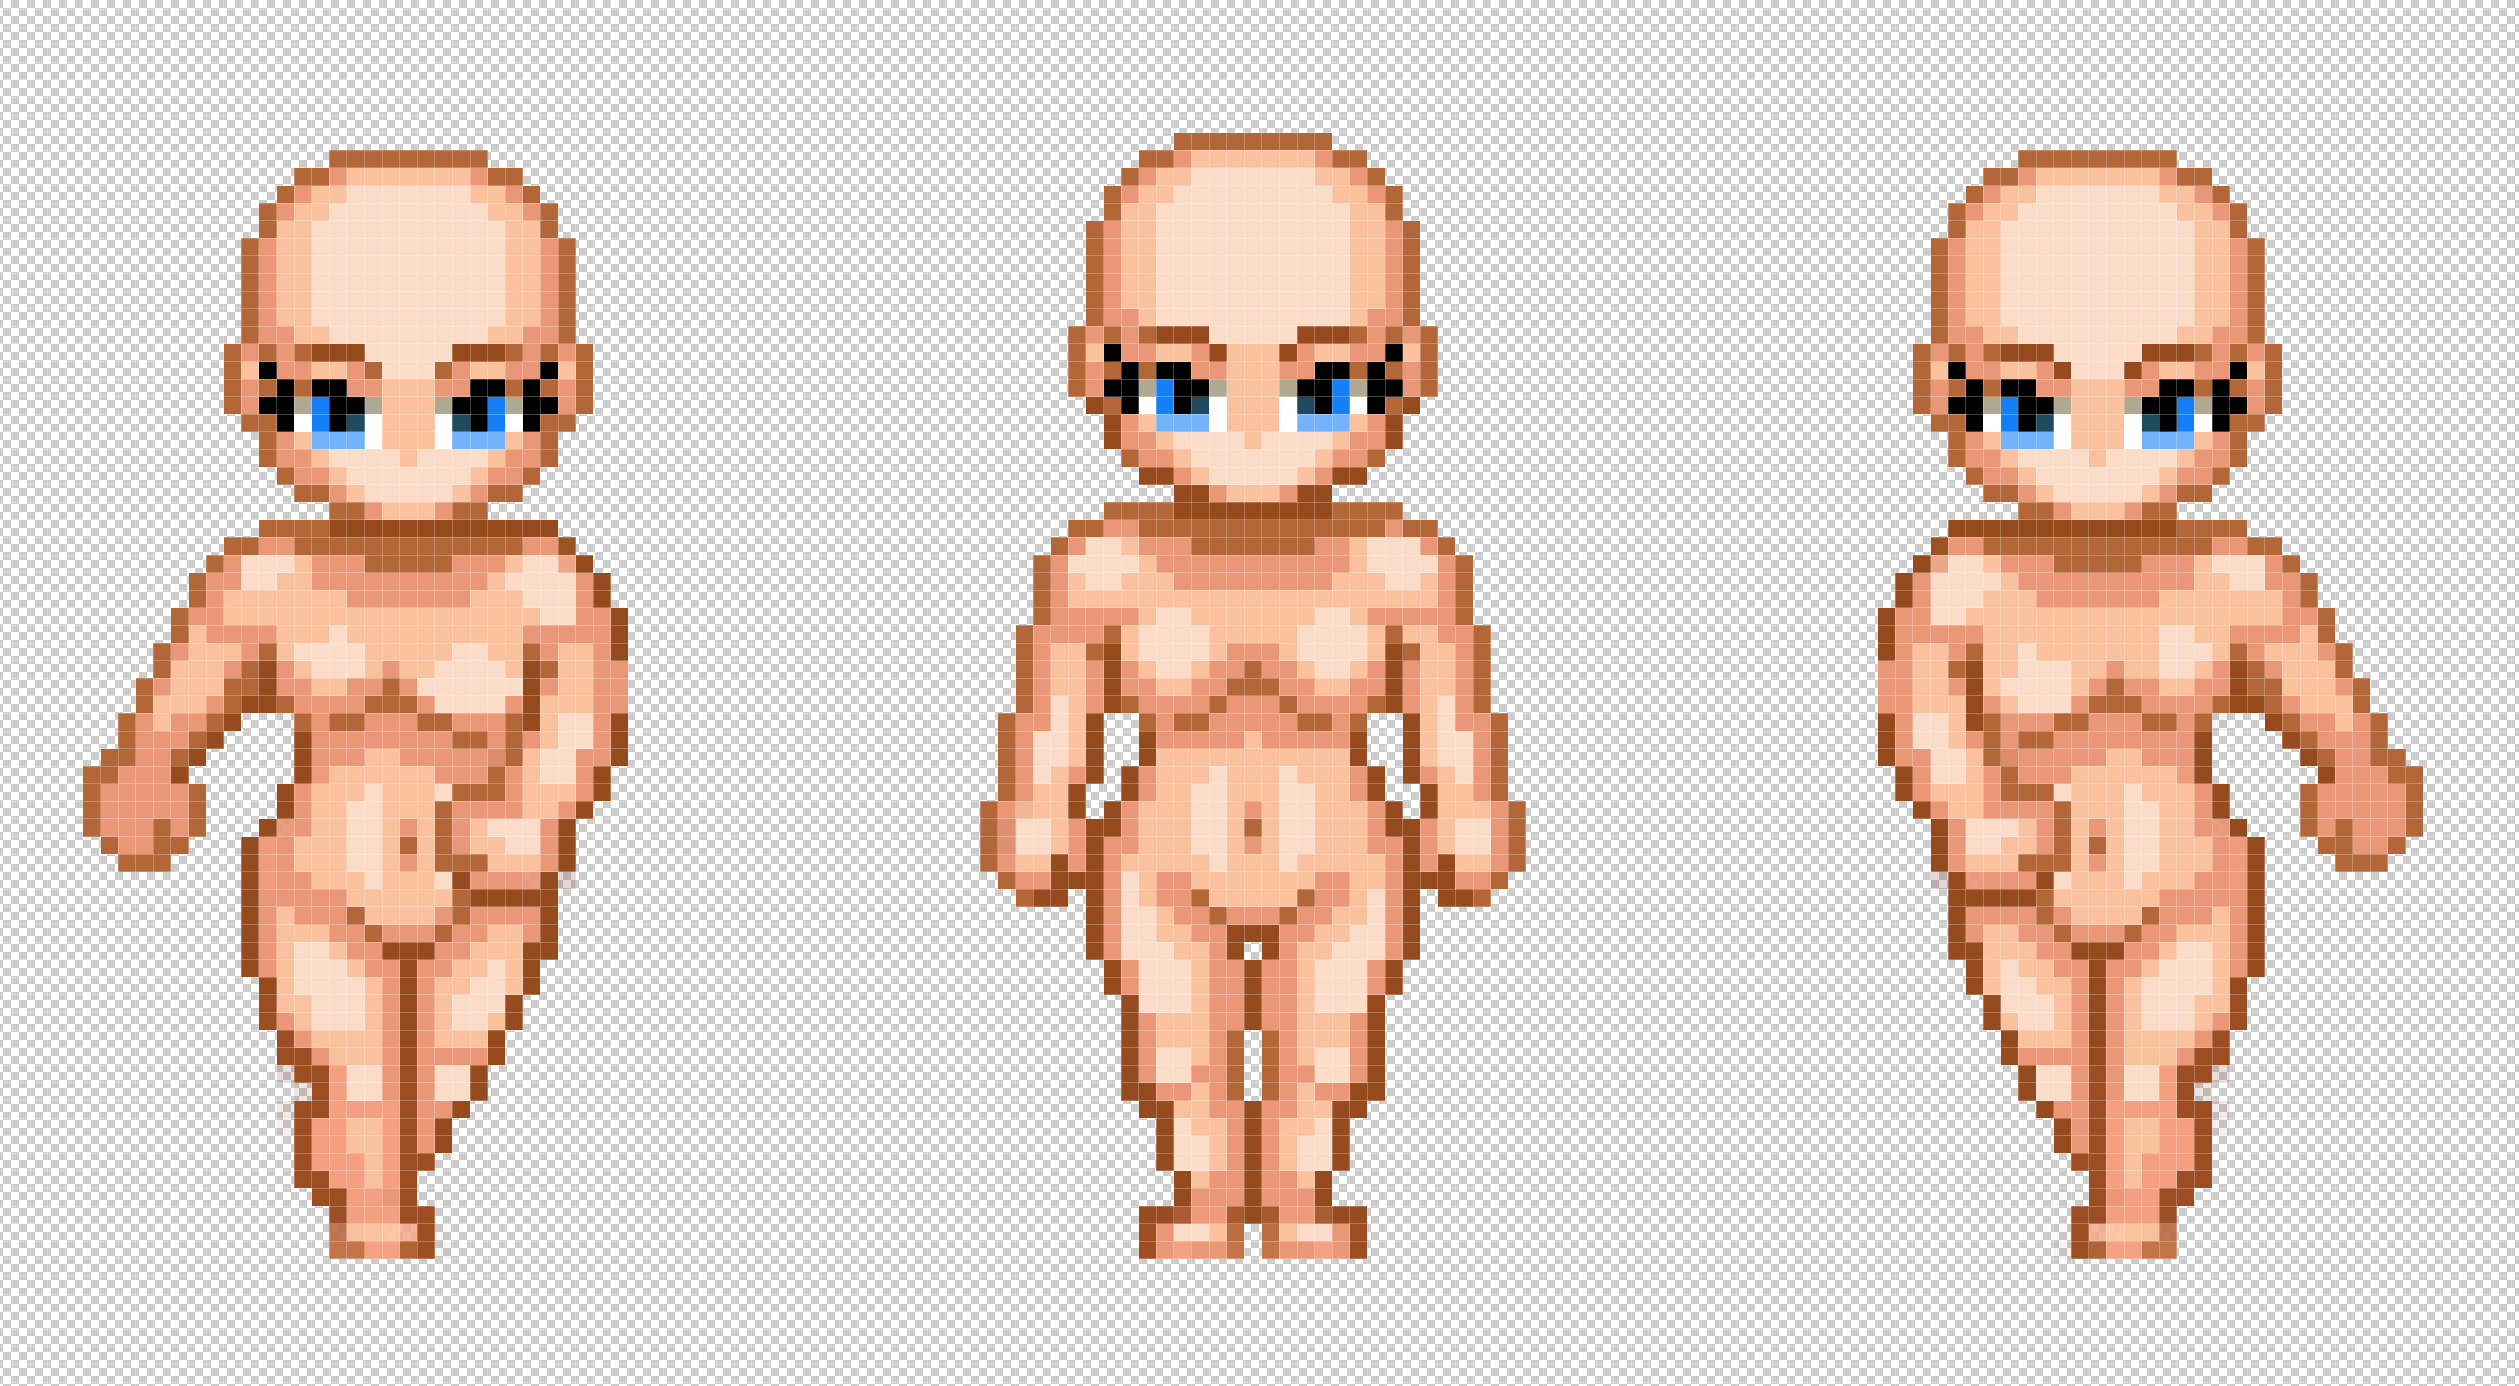 Tall Female Character Sprite (RMMV)